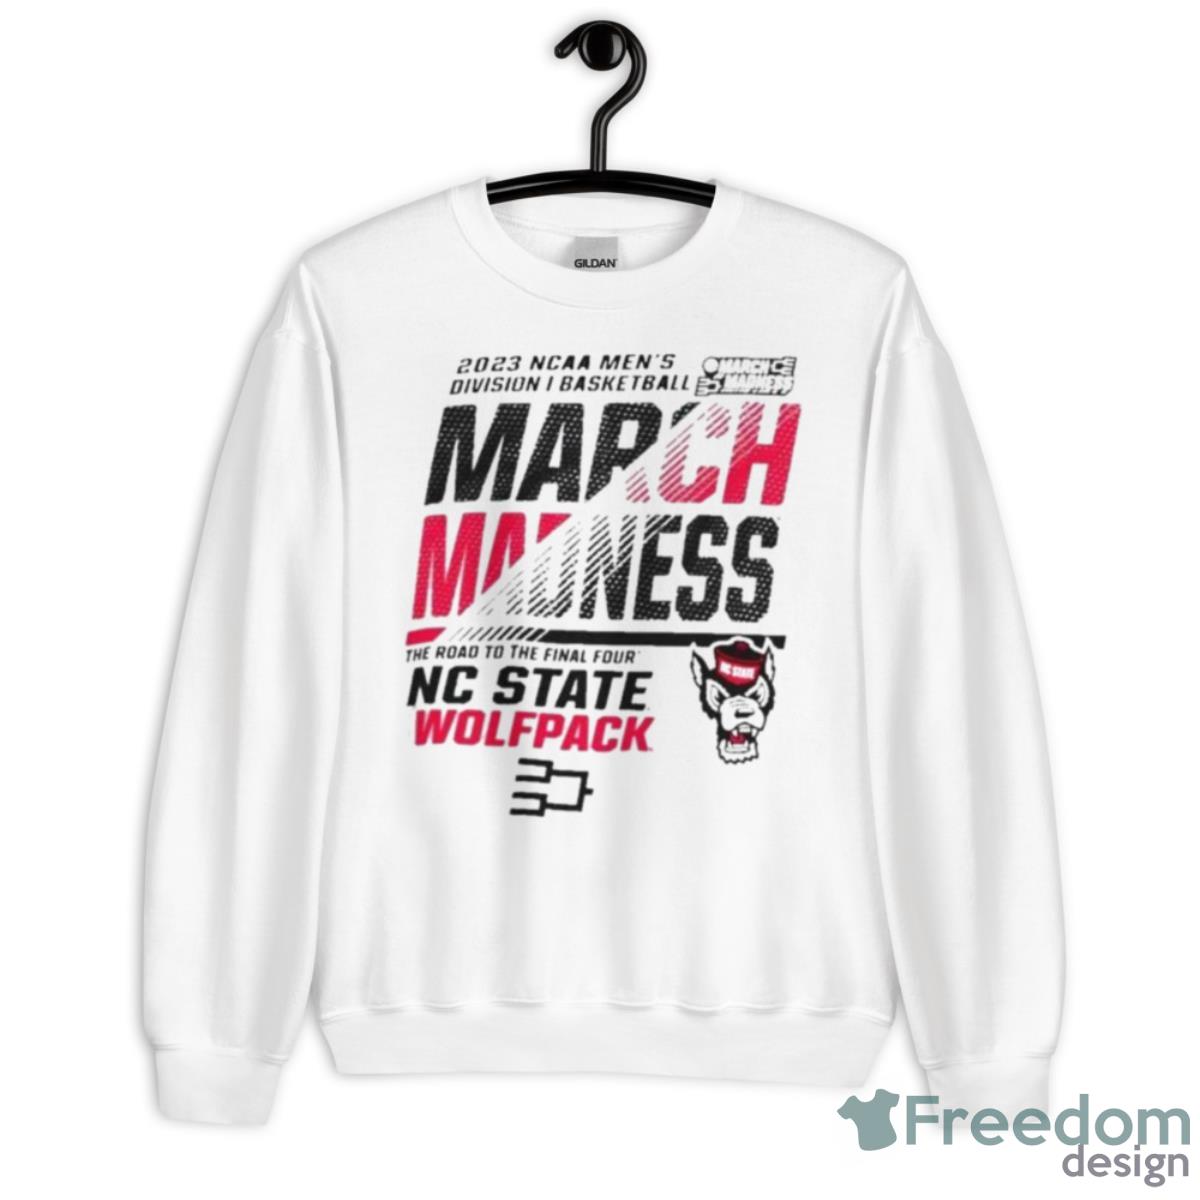 NC State Wolfpack 2023 NCAA Men’s Basketball March Madness Shirt